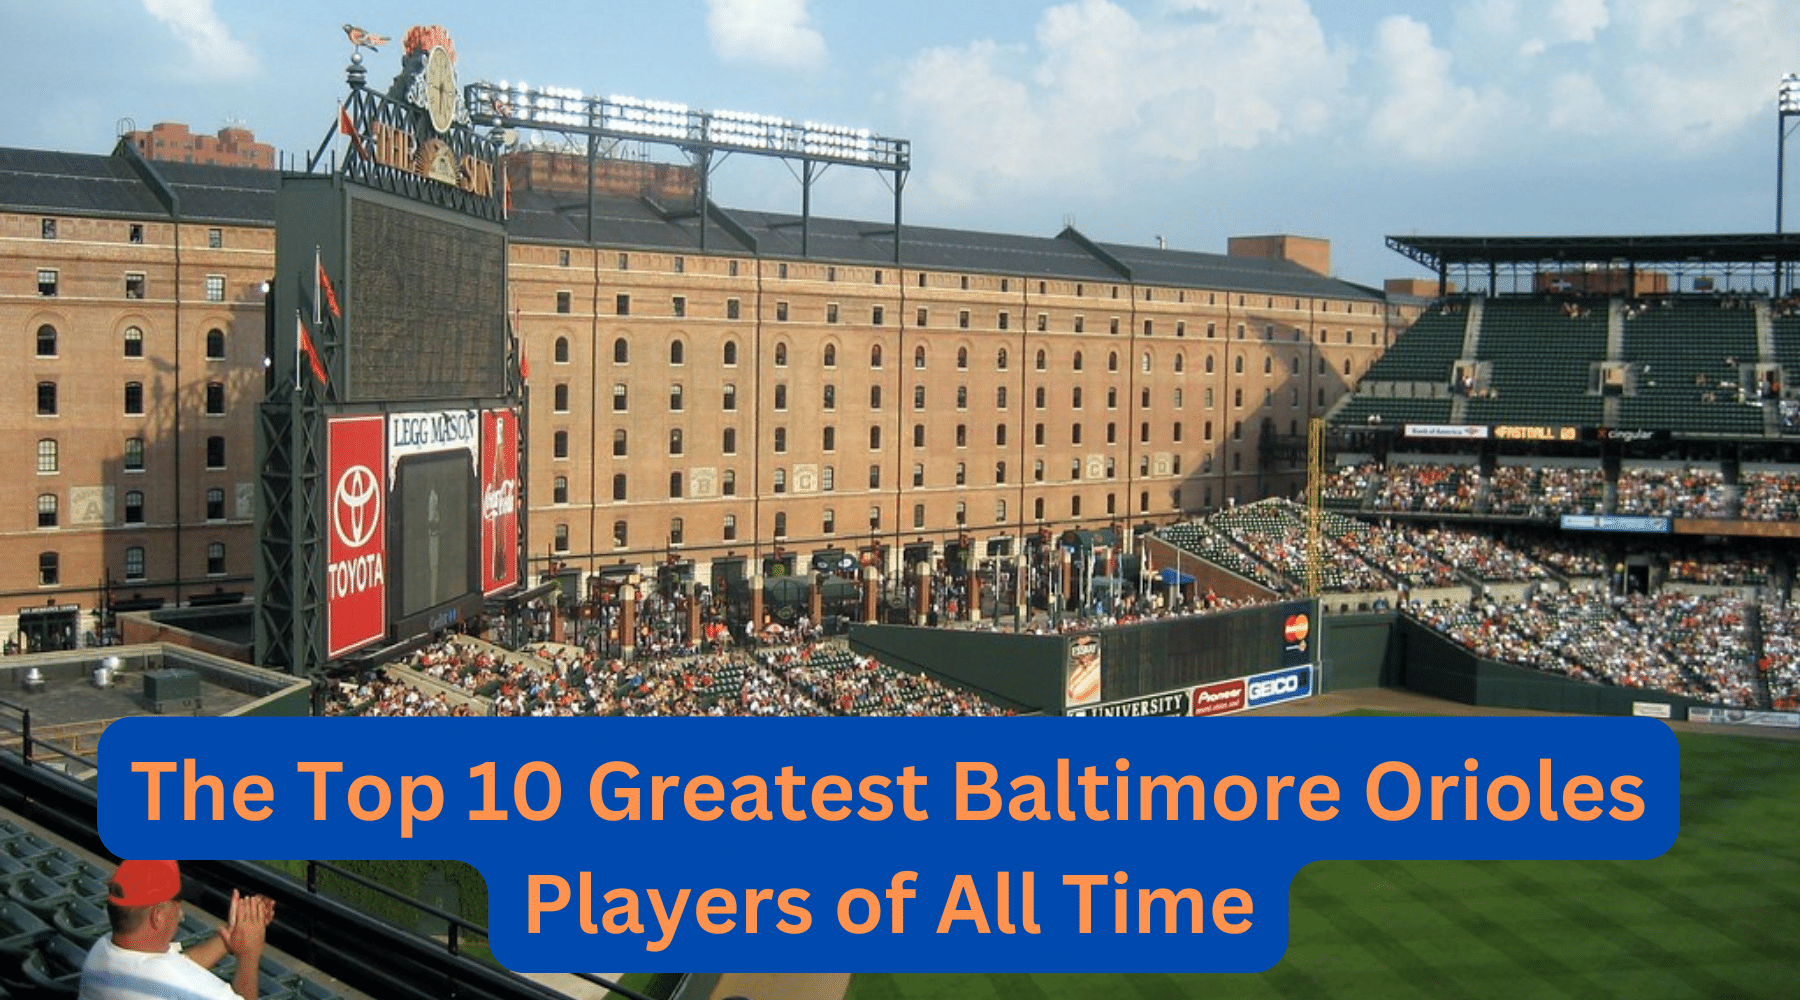 The Top 10 Greatest Baltimore Orioles Players of All Time